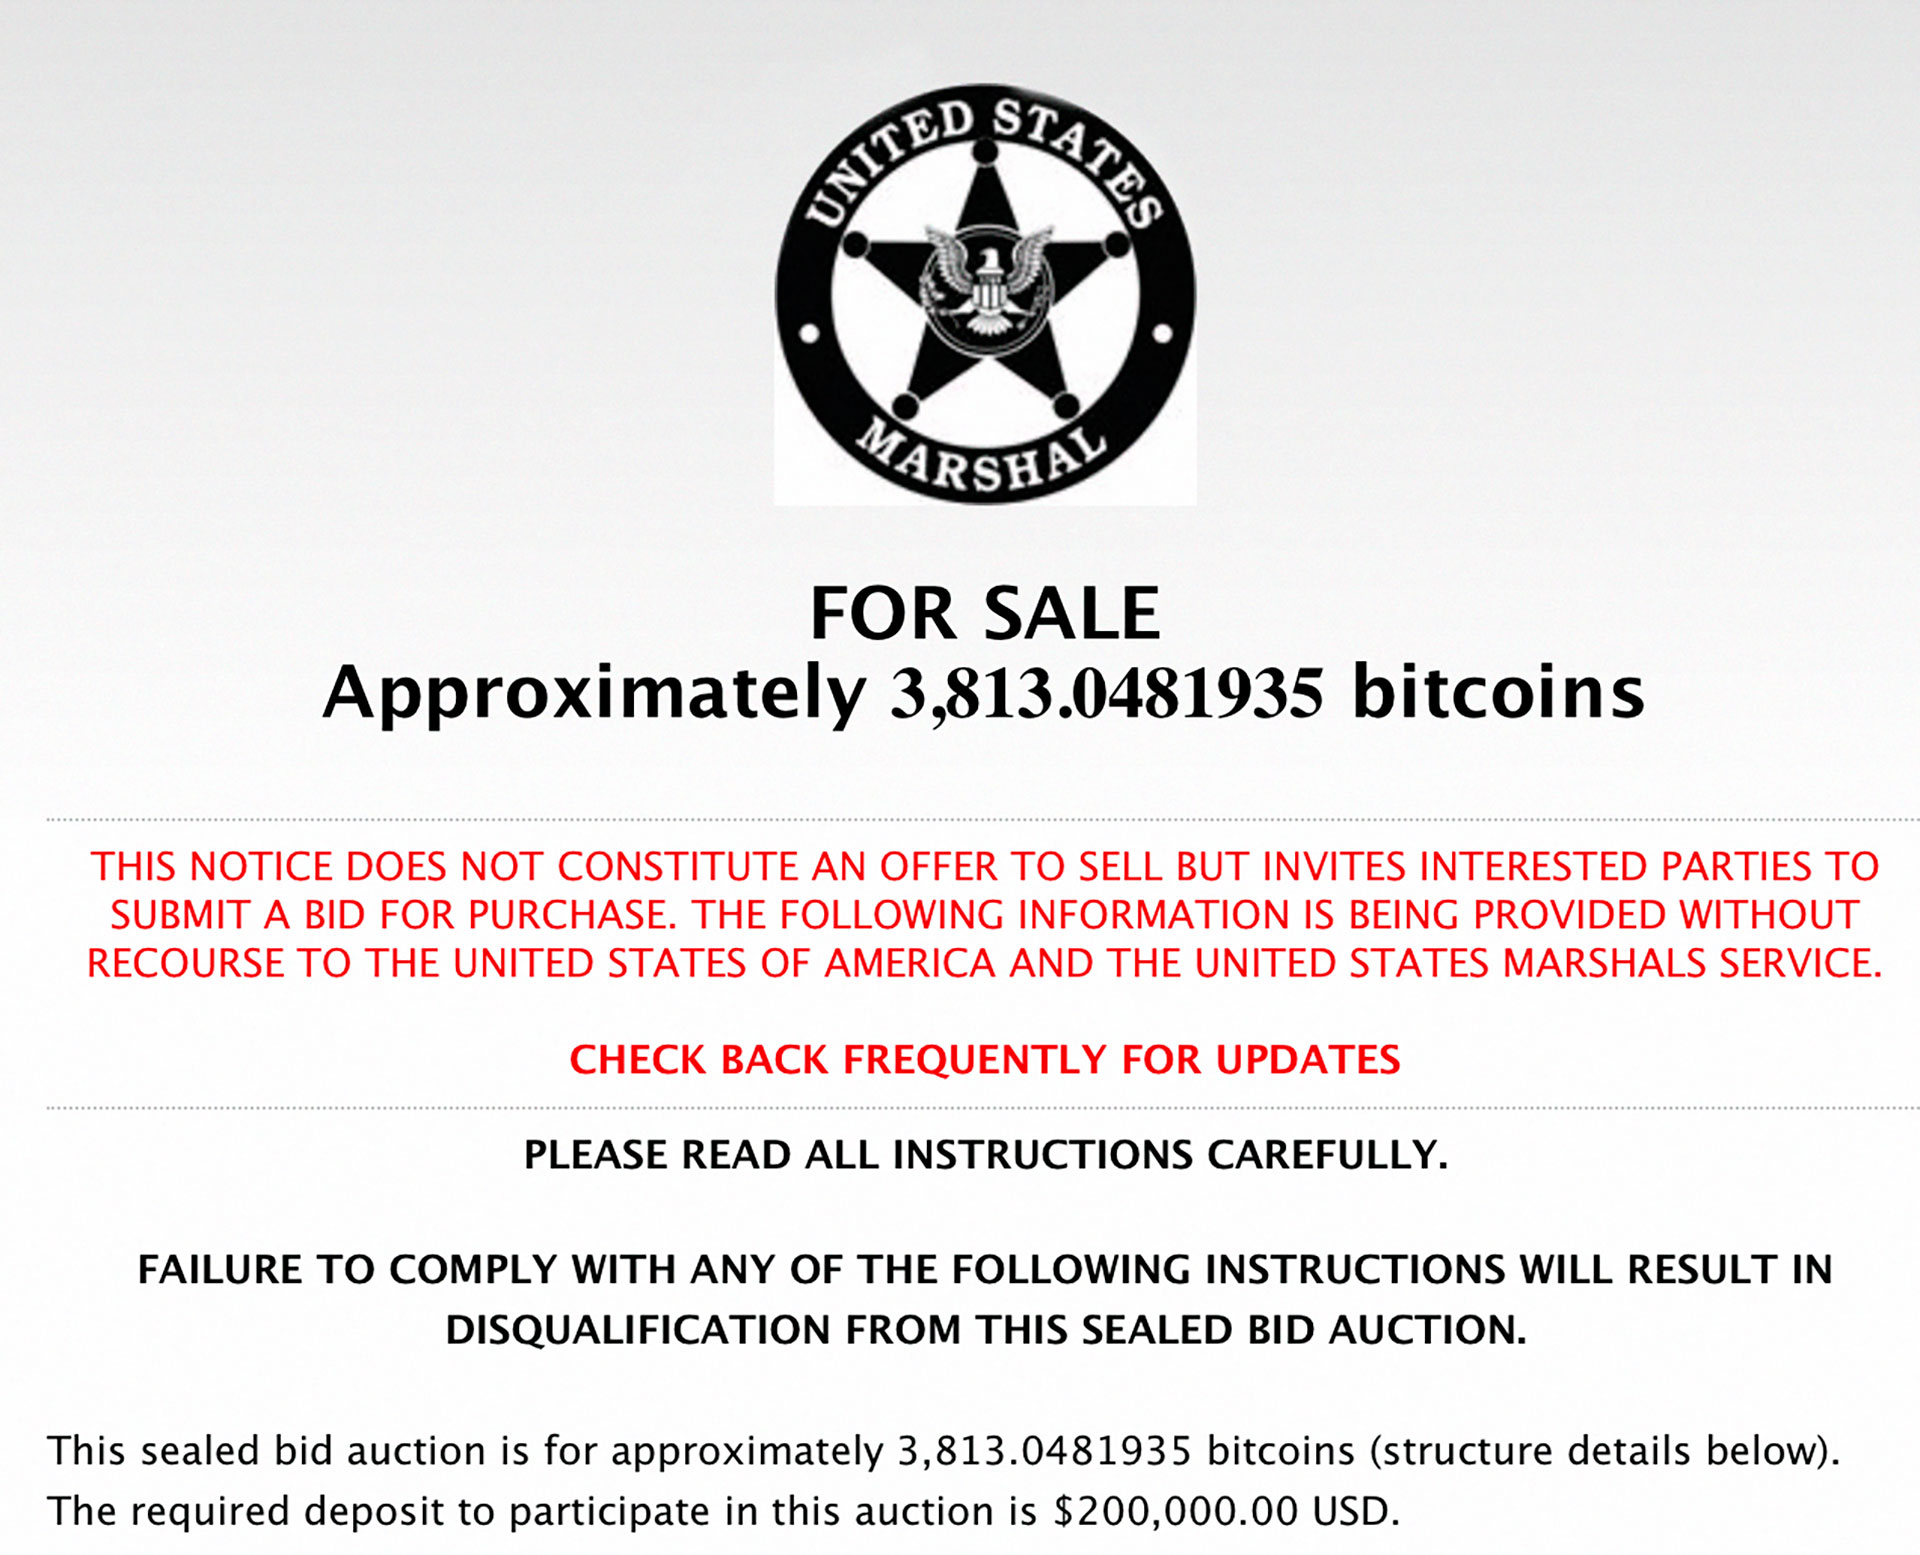 Global Law Enforcement Has Auctioned Massive Amounts of Bitcoin